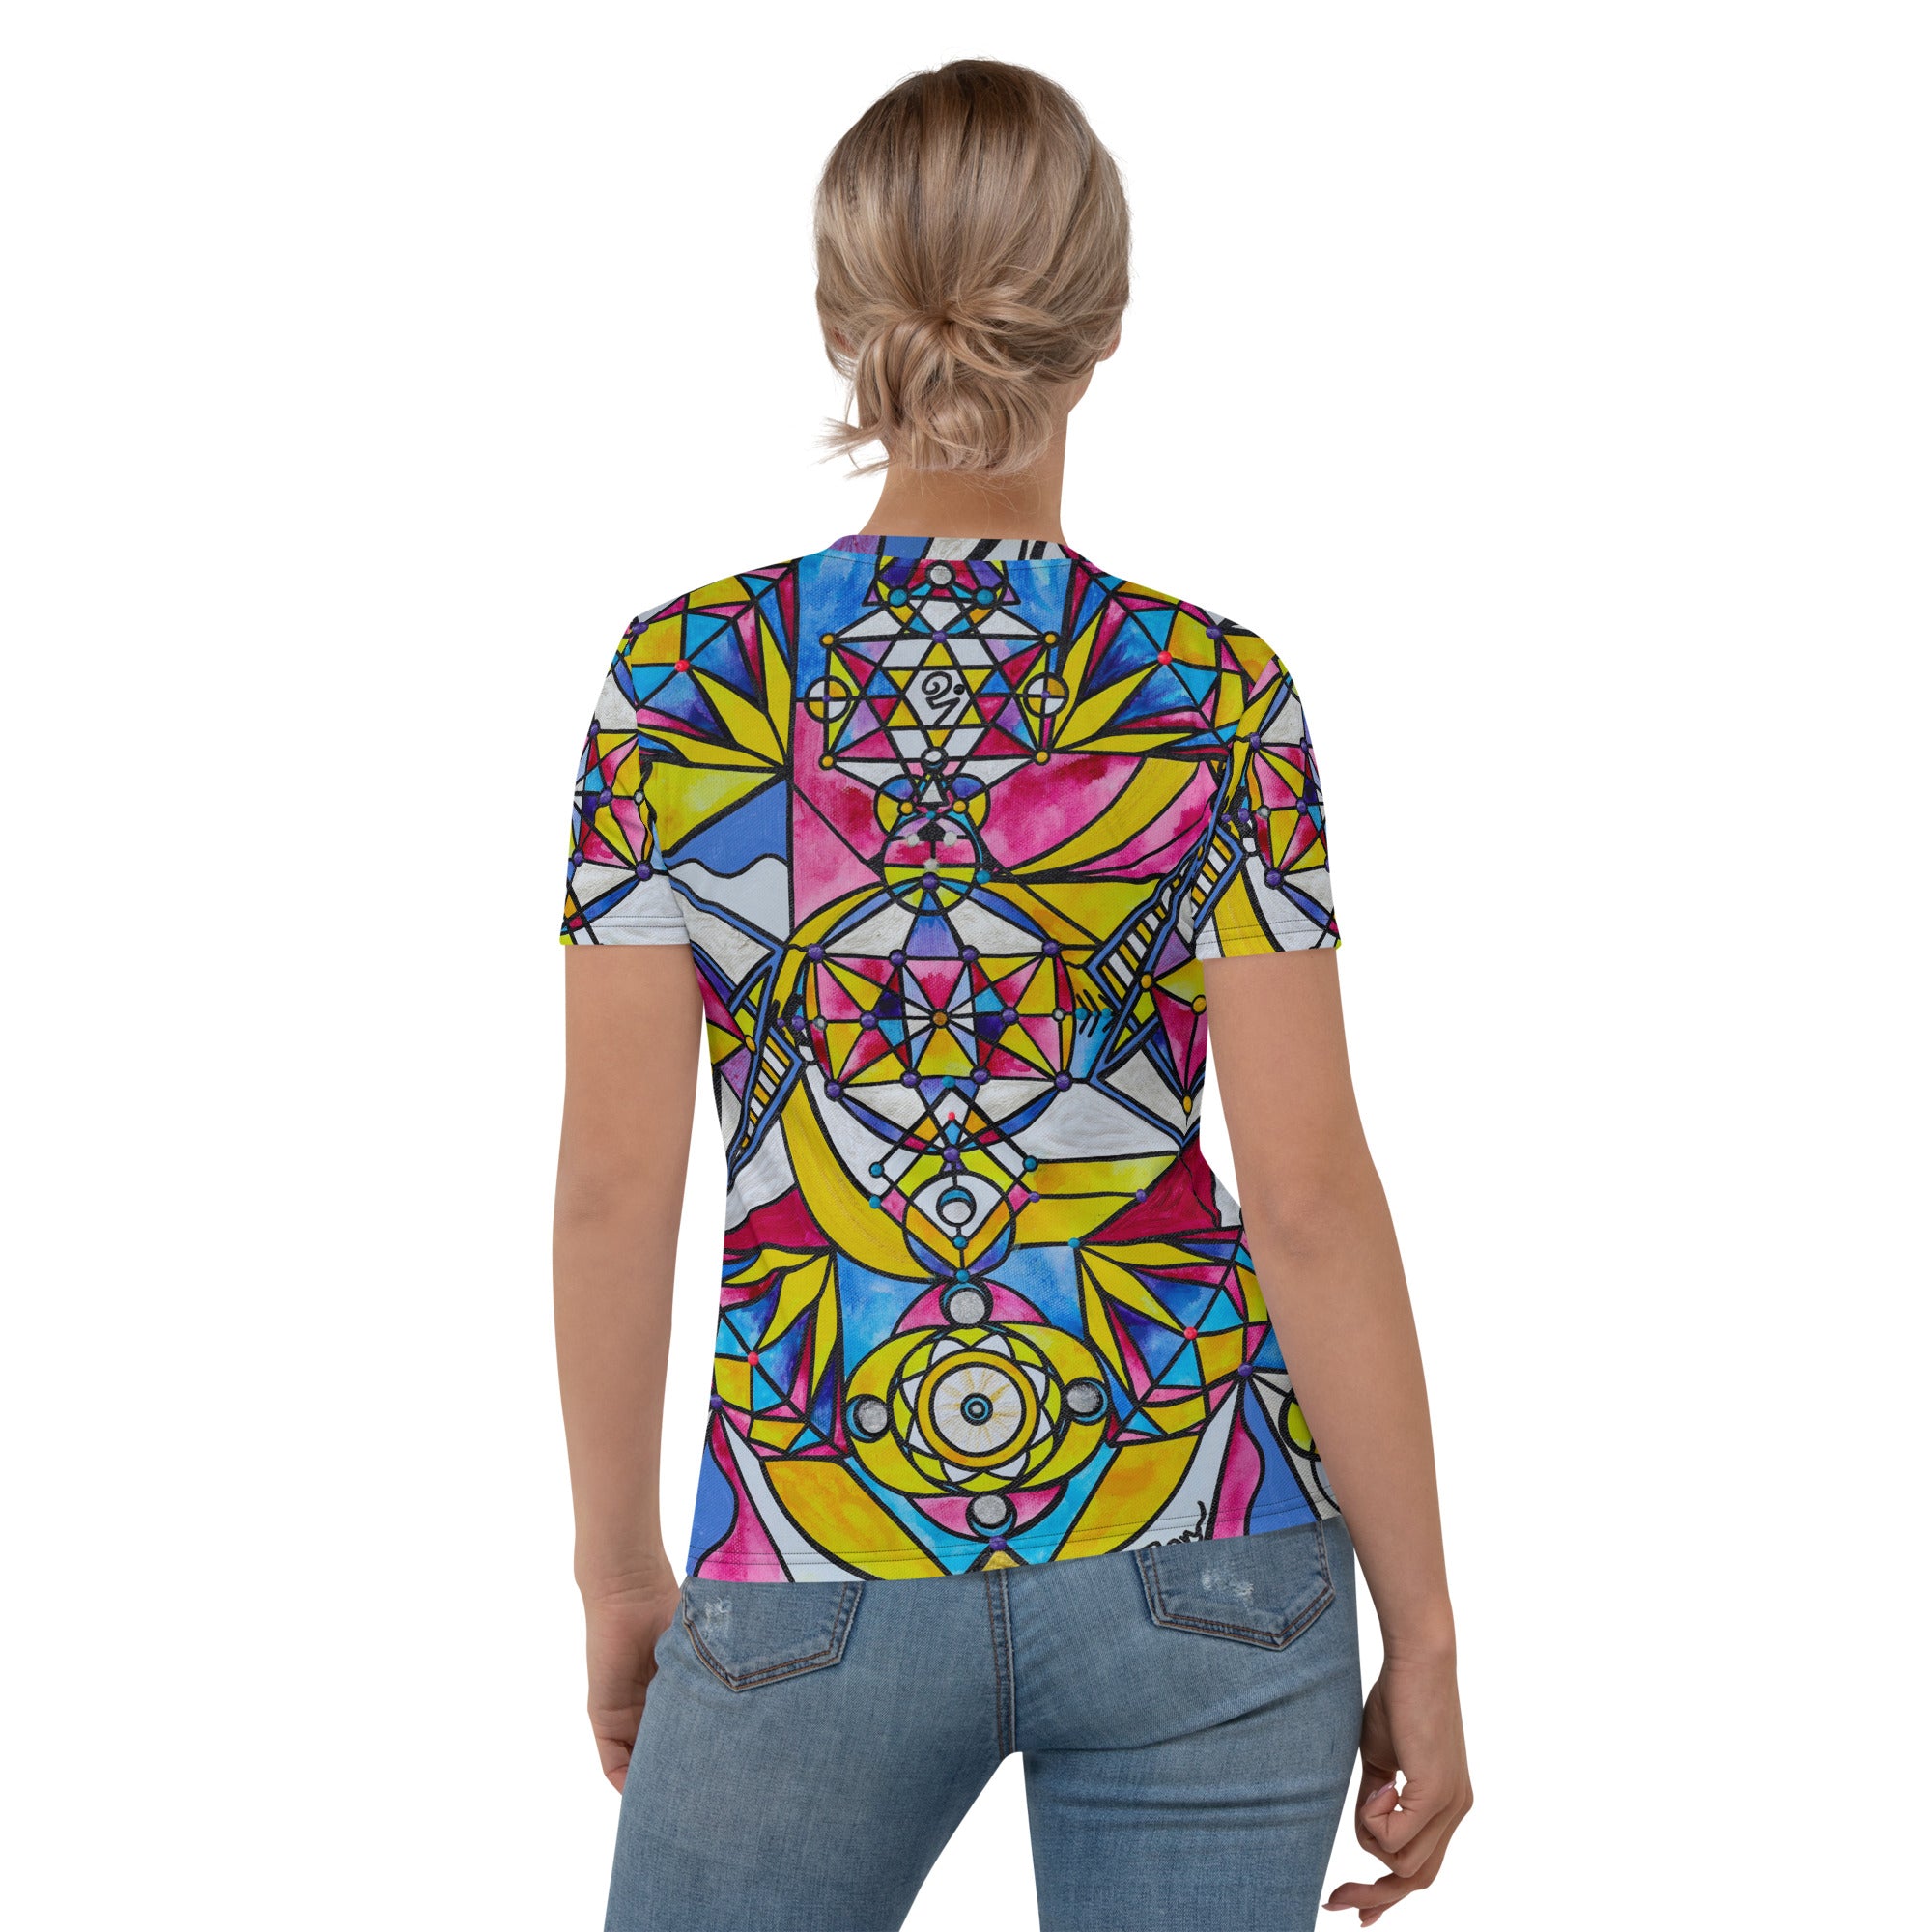 the-newest-page-on-the-internet-to-buy-sanat-kumara-consciousness-womens-t-shirt-hot-on-sale_1.jpg